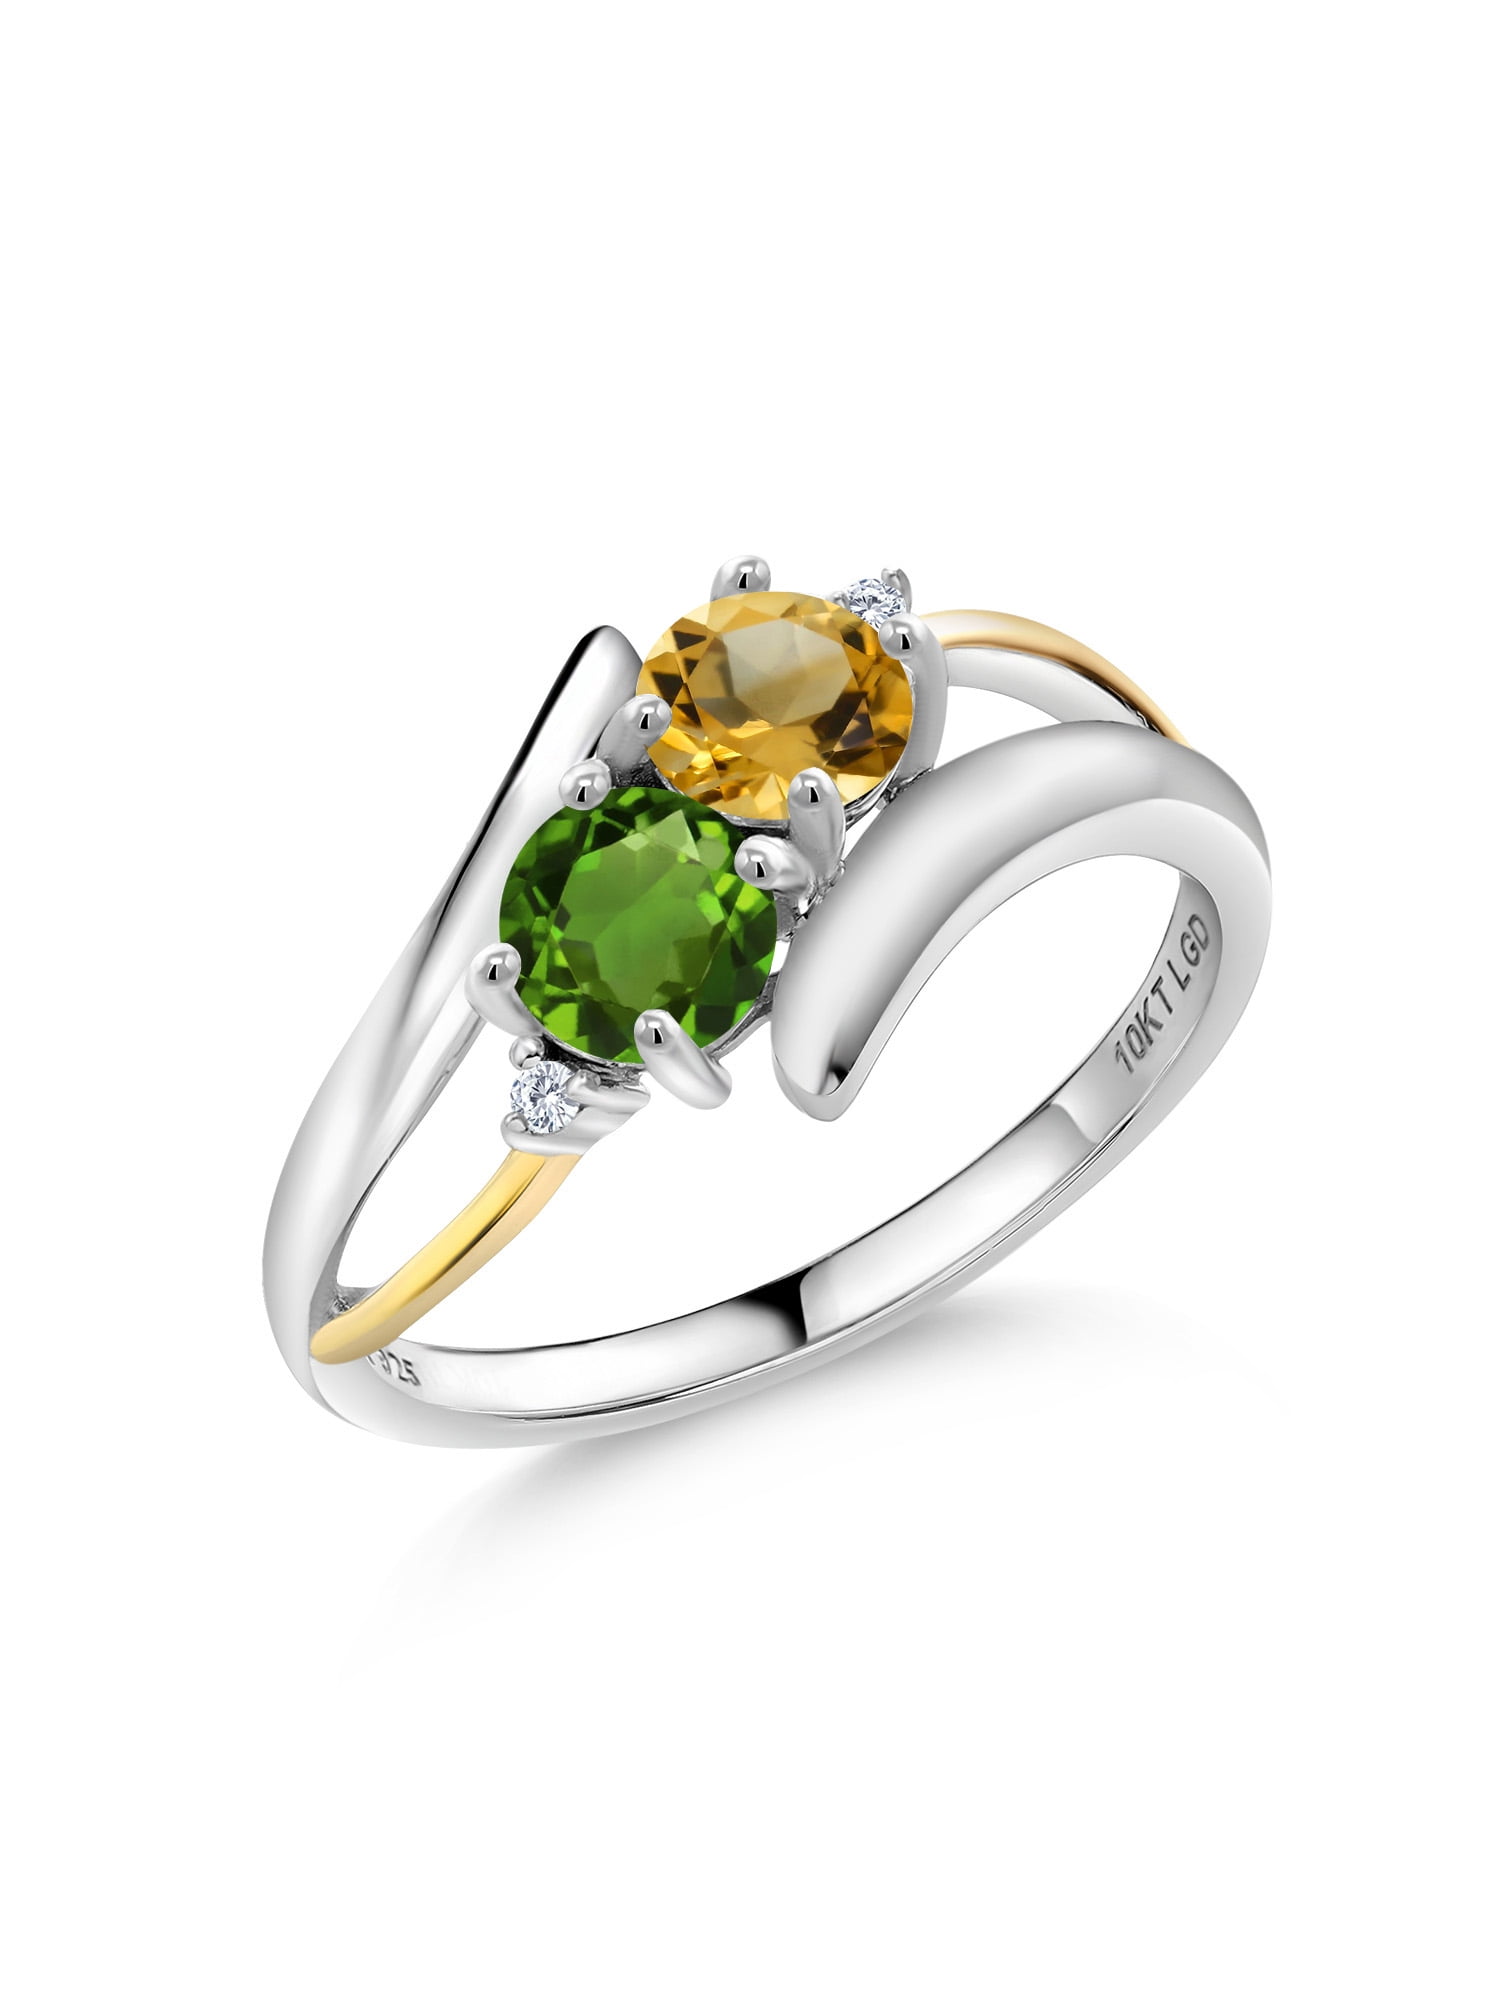 100% NATURAL 10X8MM CITRINE & APPLE PERIDOT RARE STERLING SILVER 925 RING SIZE 7